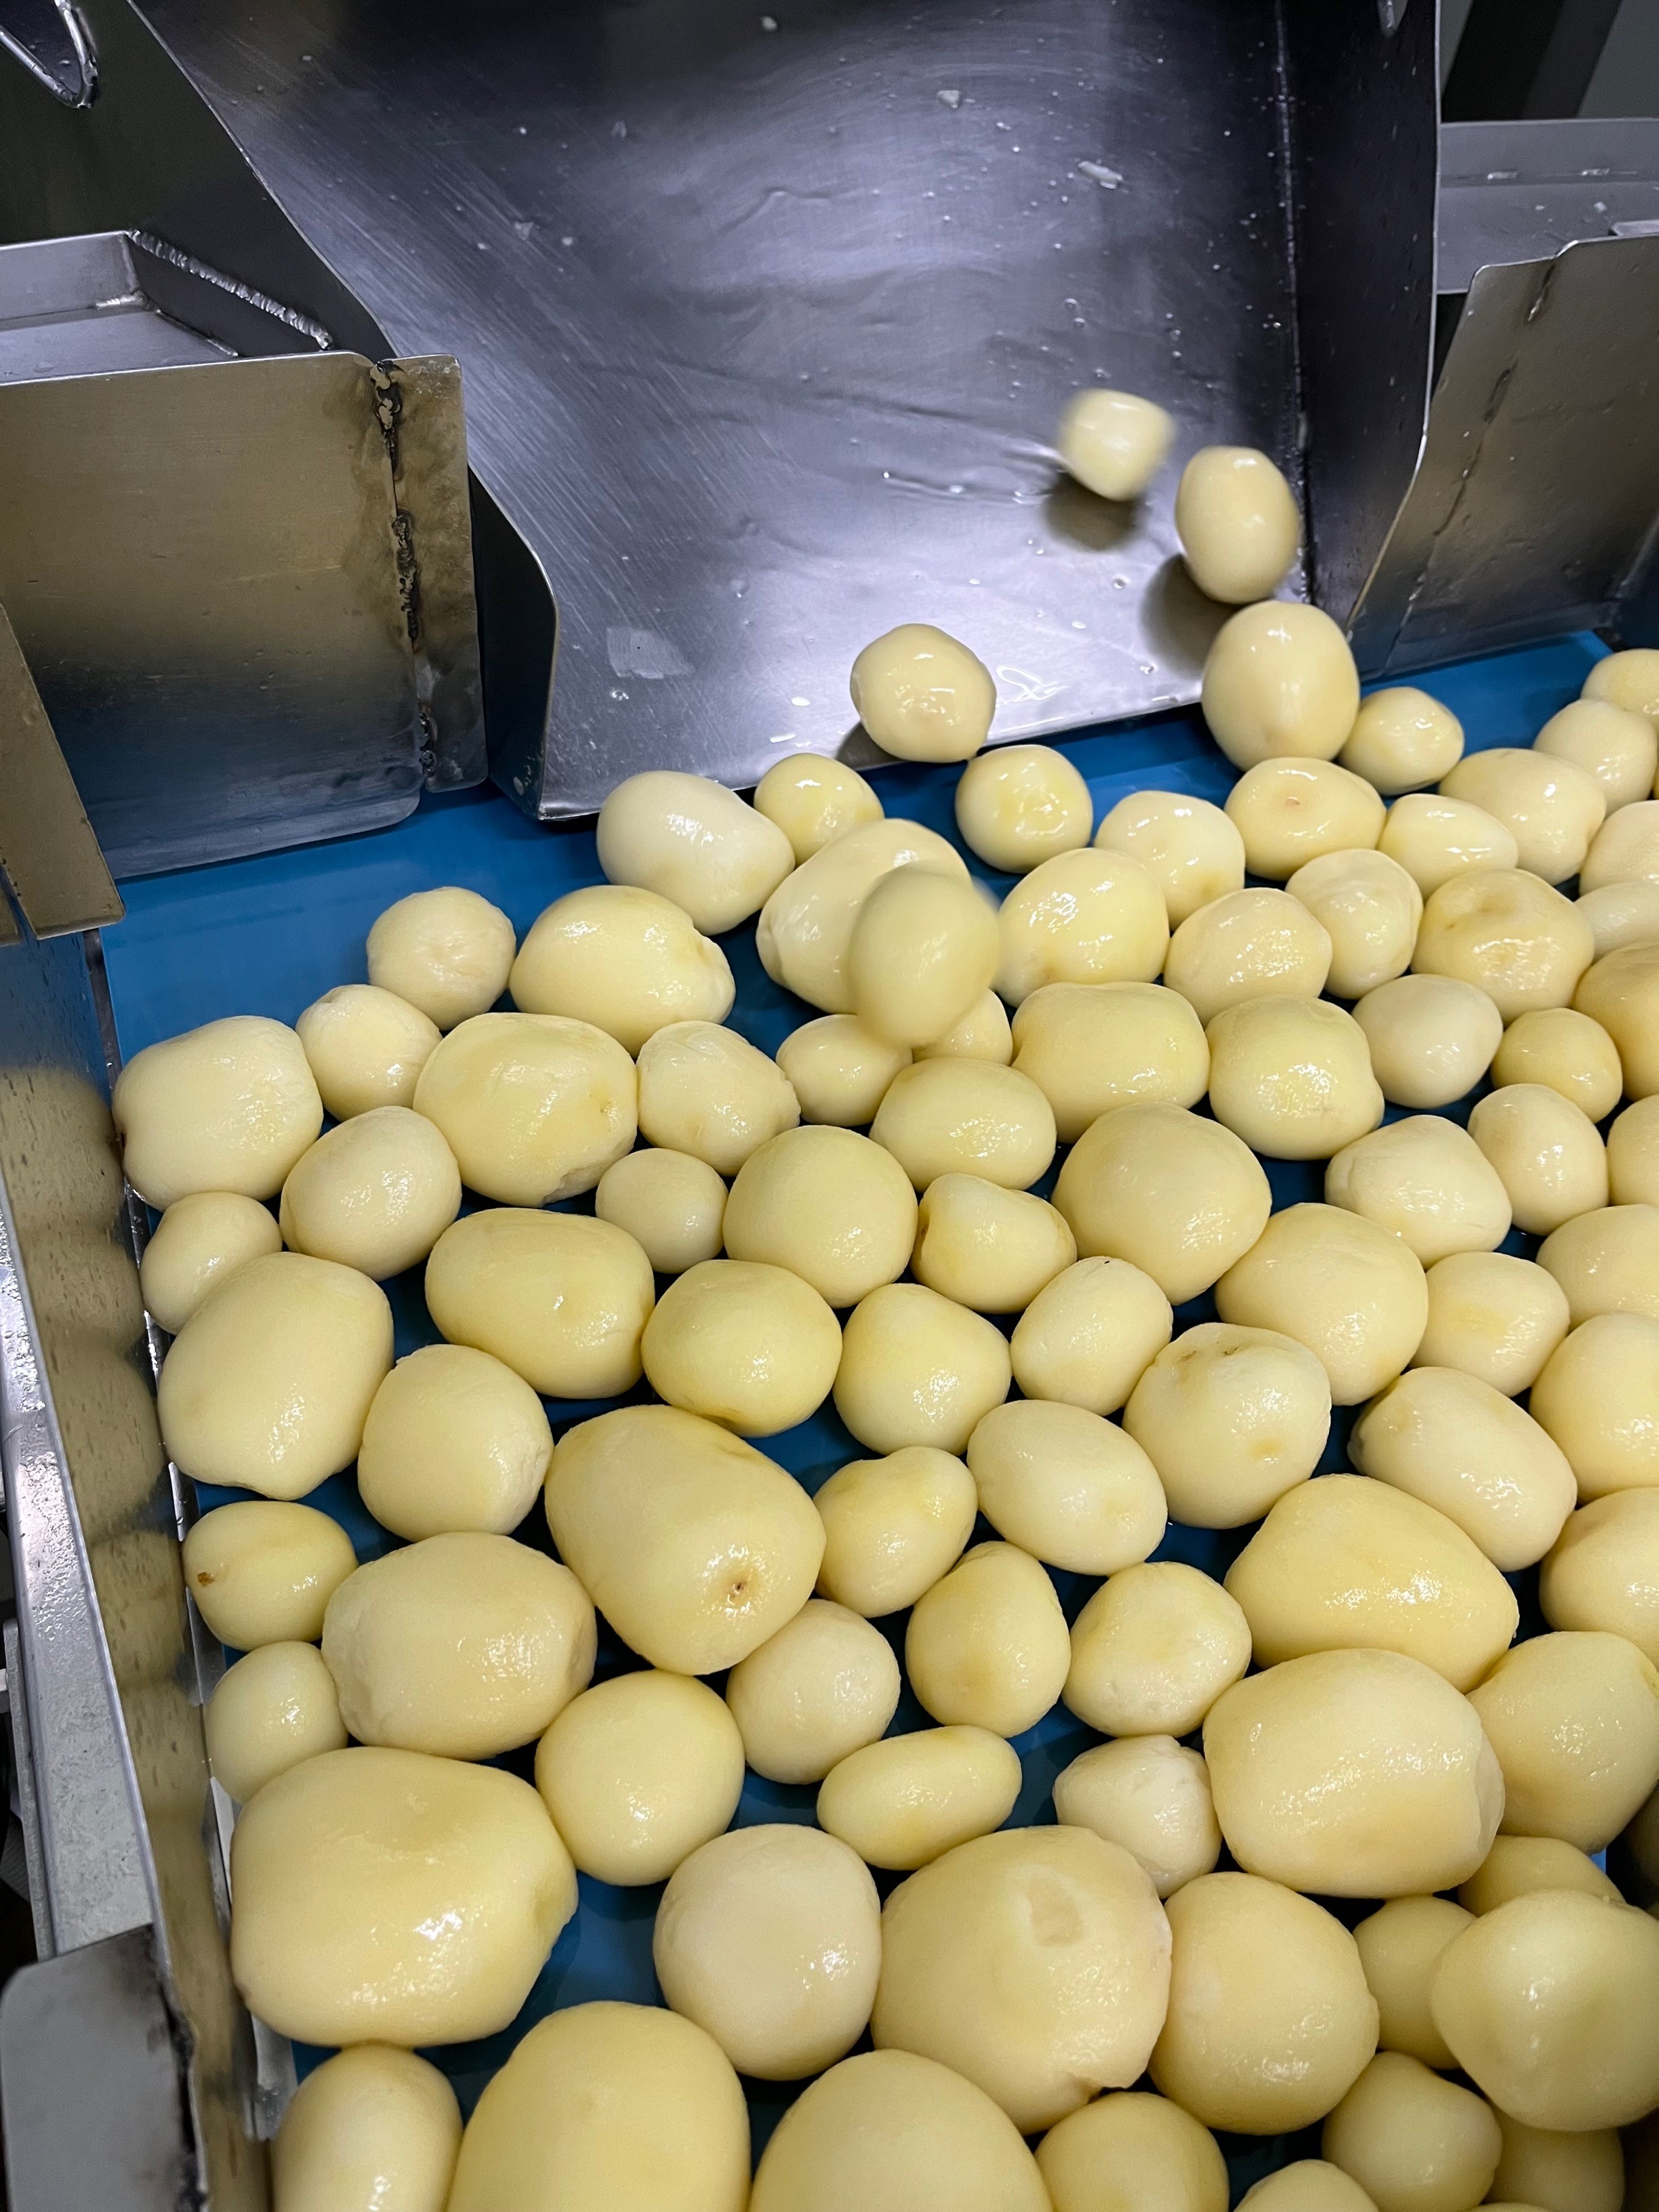 HOW THE BEST STEAM PEELERS CAN SIGNIFICANTLY REDUCE FOOD WASTE ON VEGETABLE PROCESSING LINES